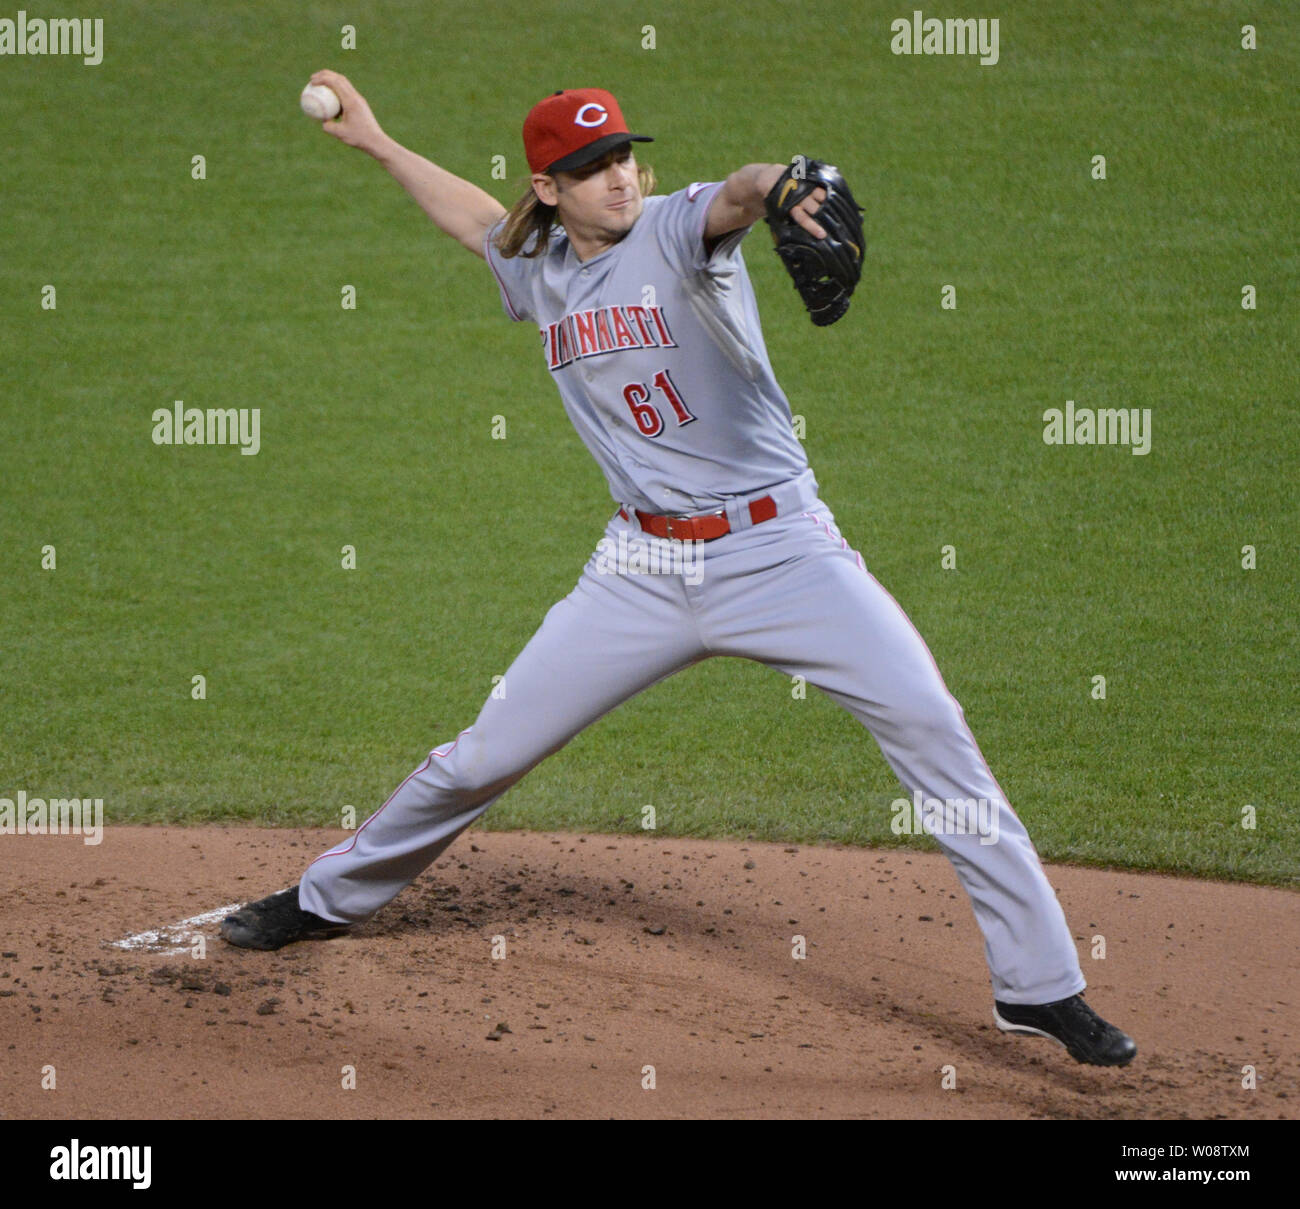 Boston Red Sox Pitcher Bronson Arroyo entering the playing field Stock  Photo - Alamy